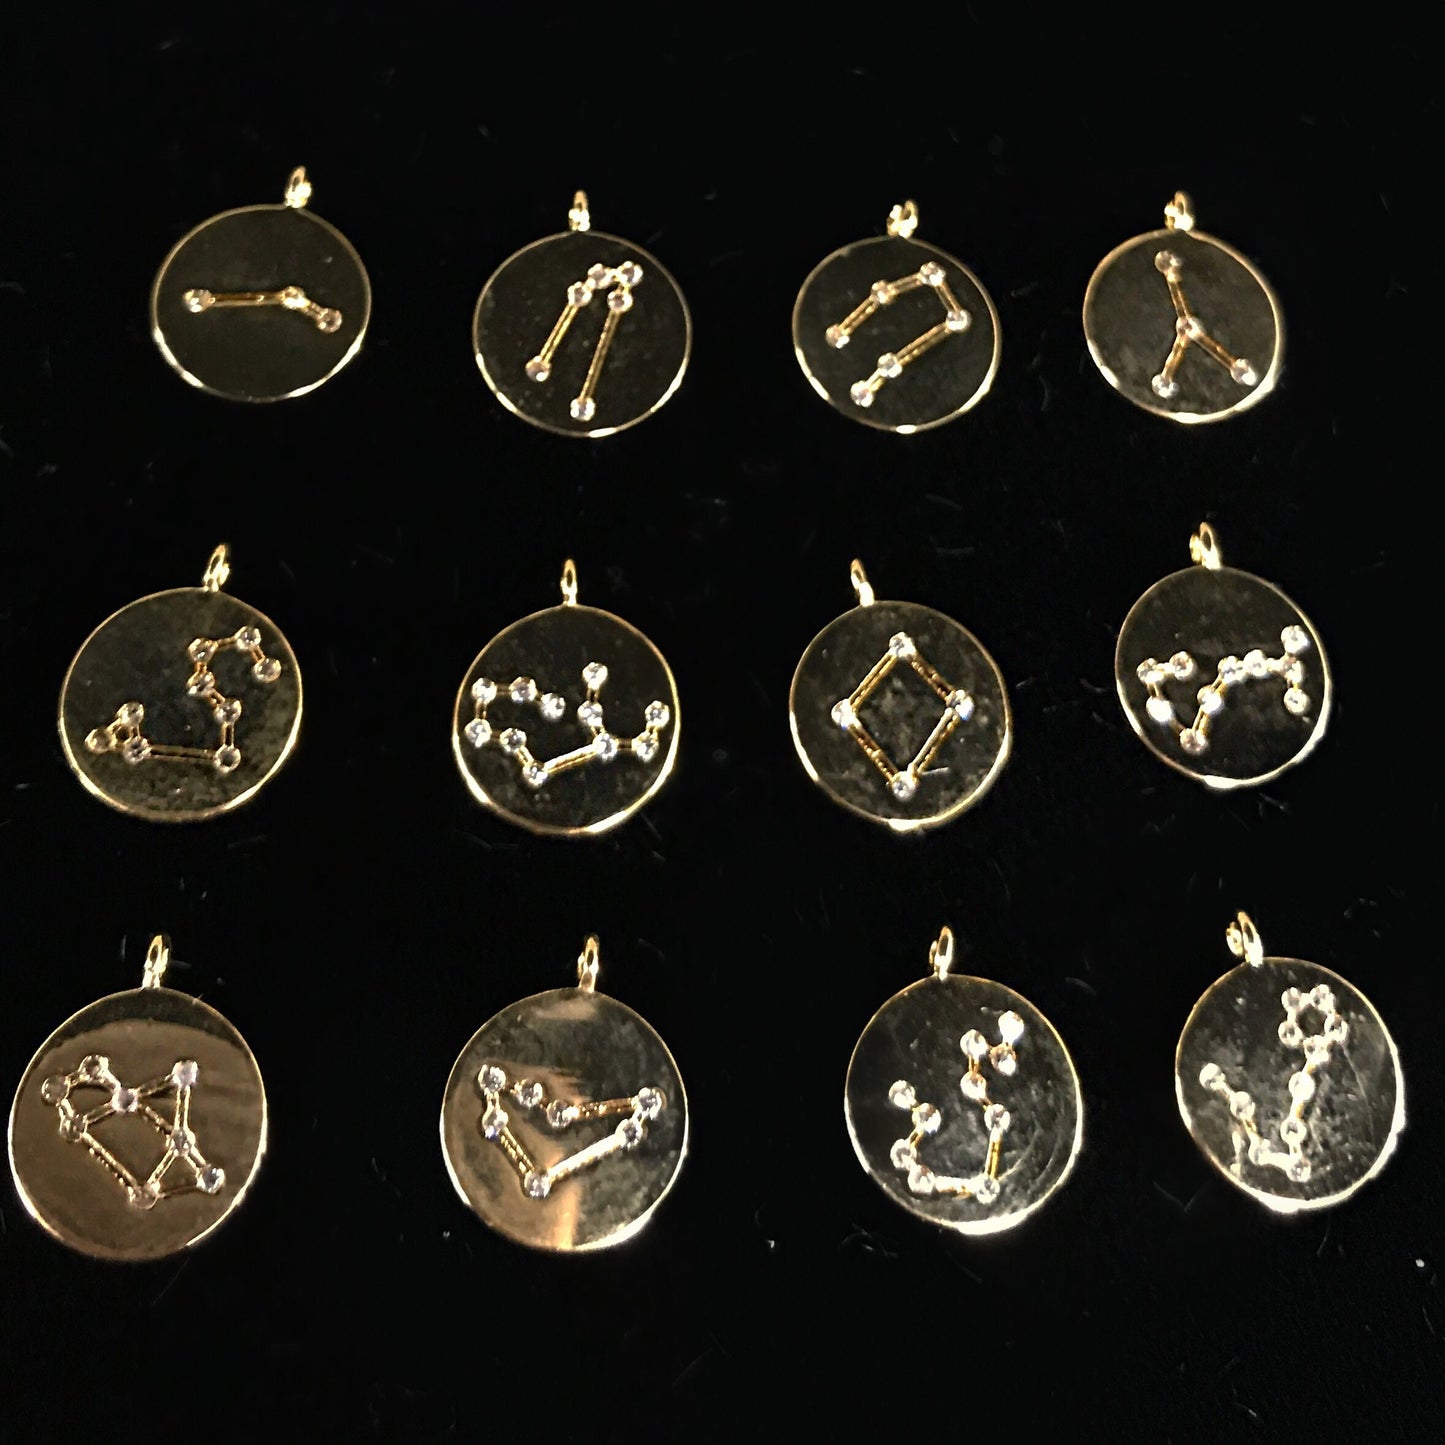 Long Constellation Crystal Horoscope Necklace